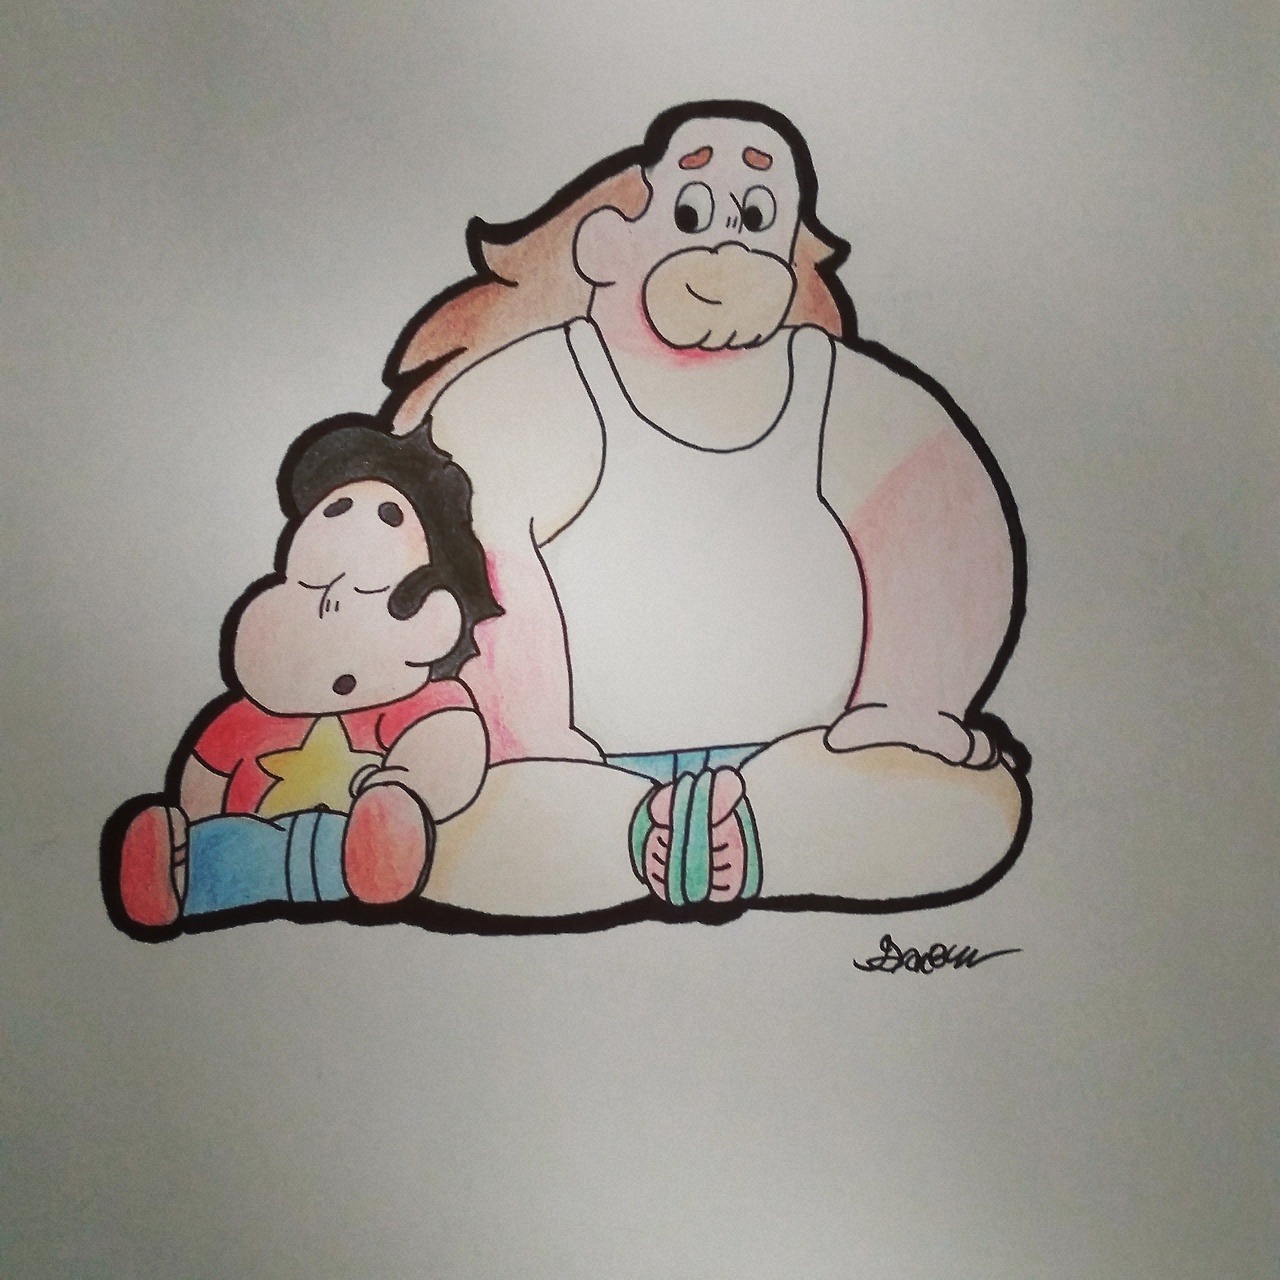 “If every pork chop were perfect, we wouldn’t have hotdogs!” I already drew Steven and Rose, so I thought I’d draw Steven and Greg as well!